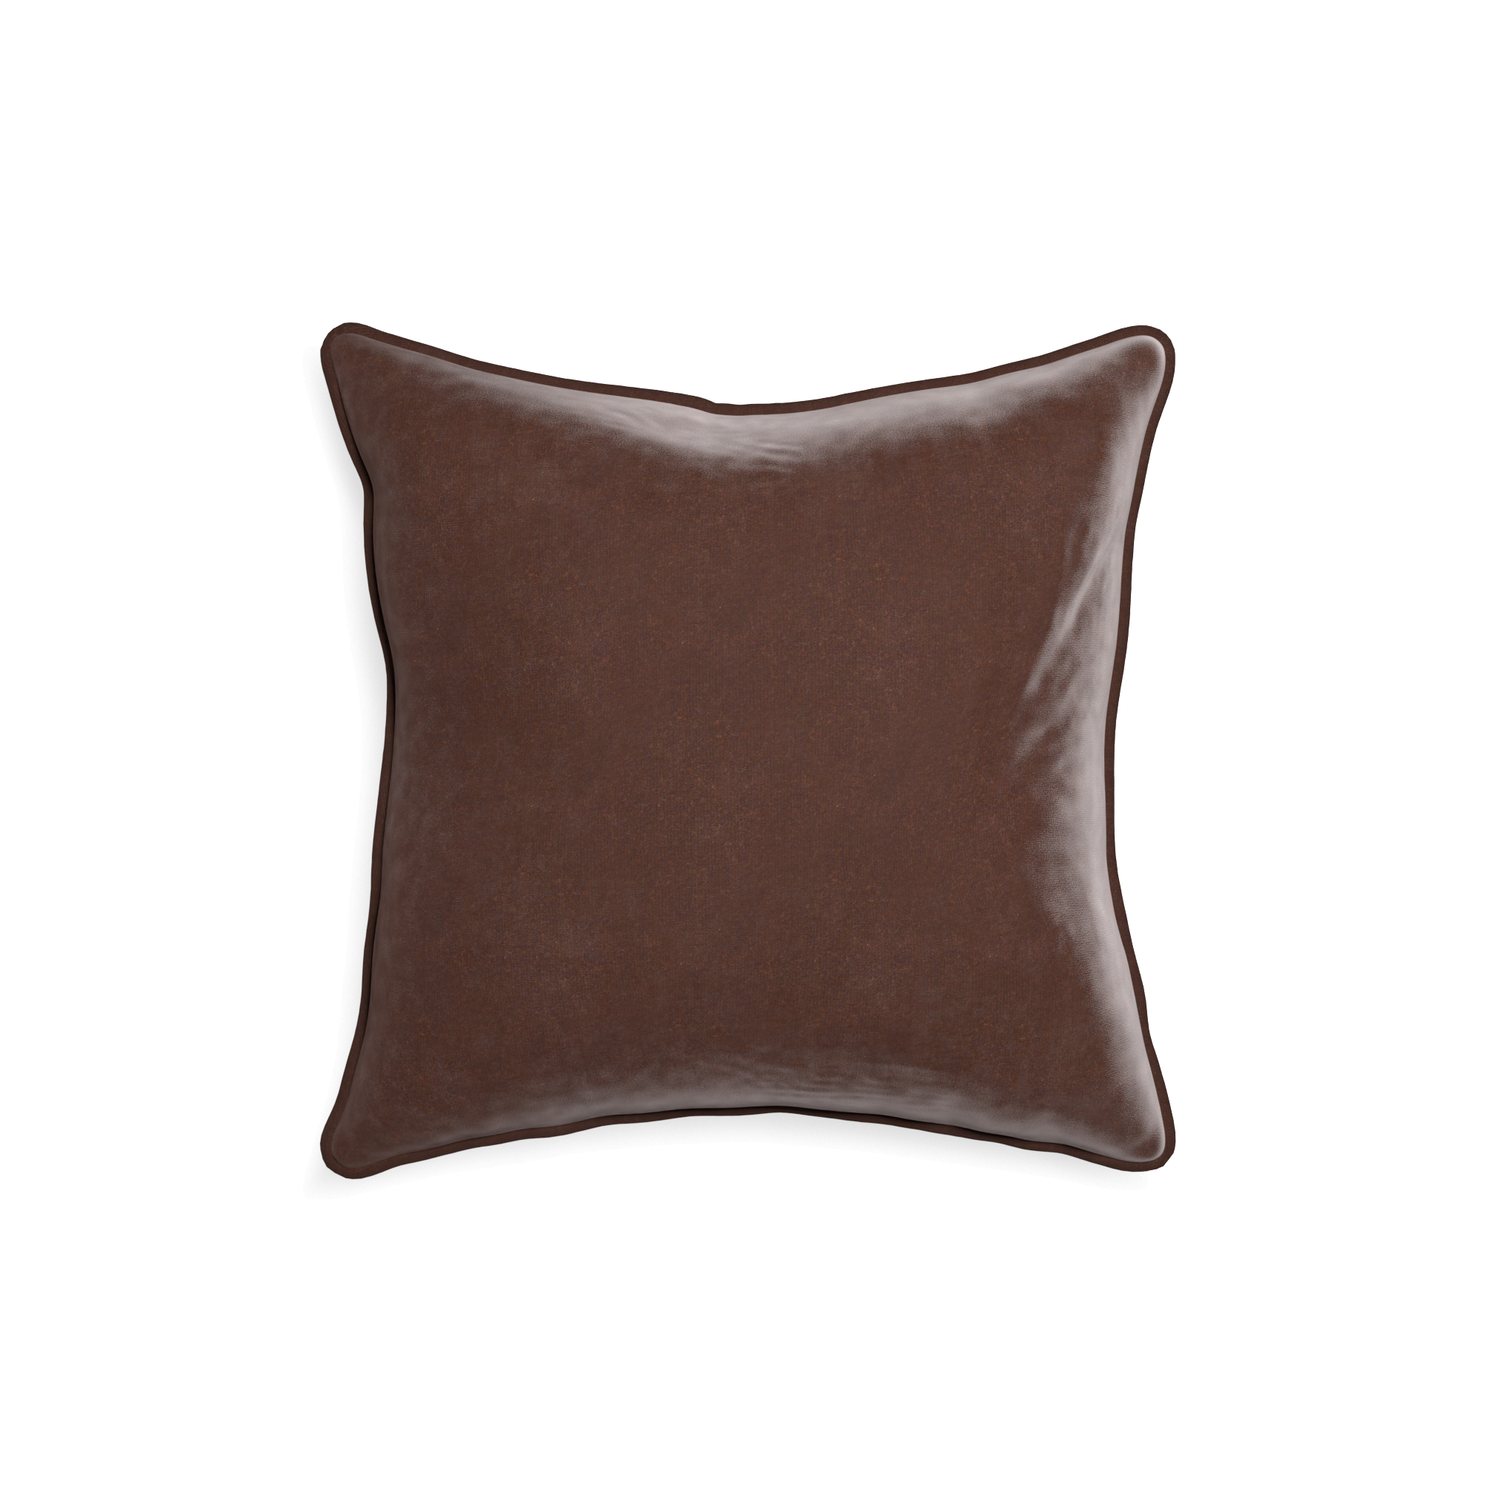 18-square walnut velvet custom pillow with w piping on white background